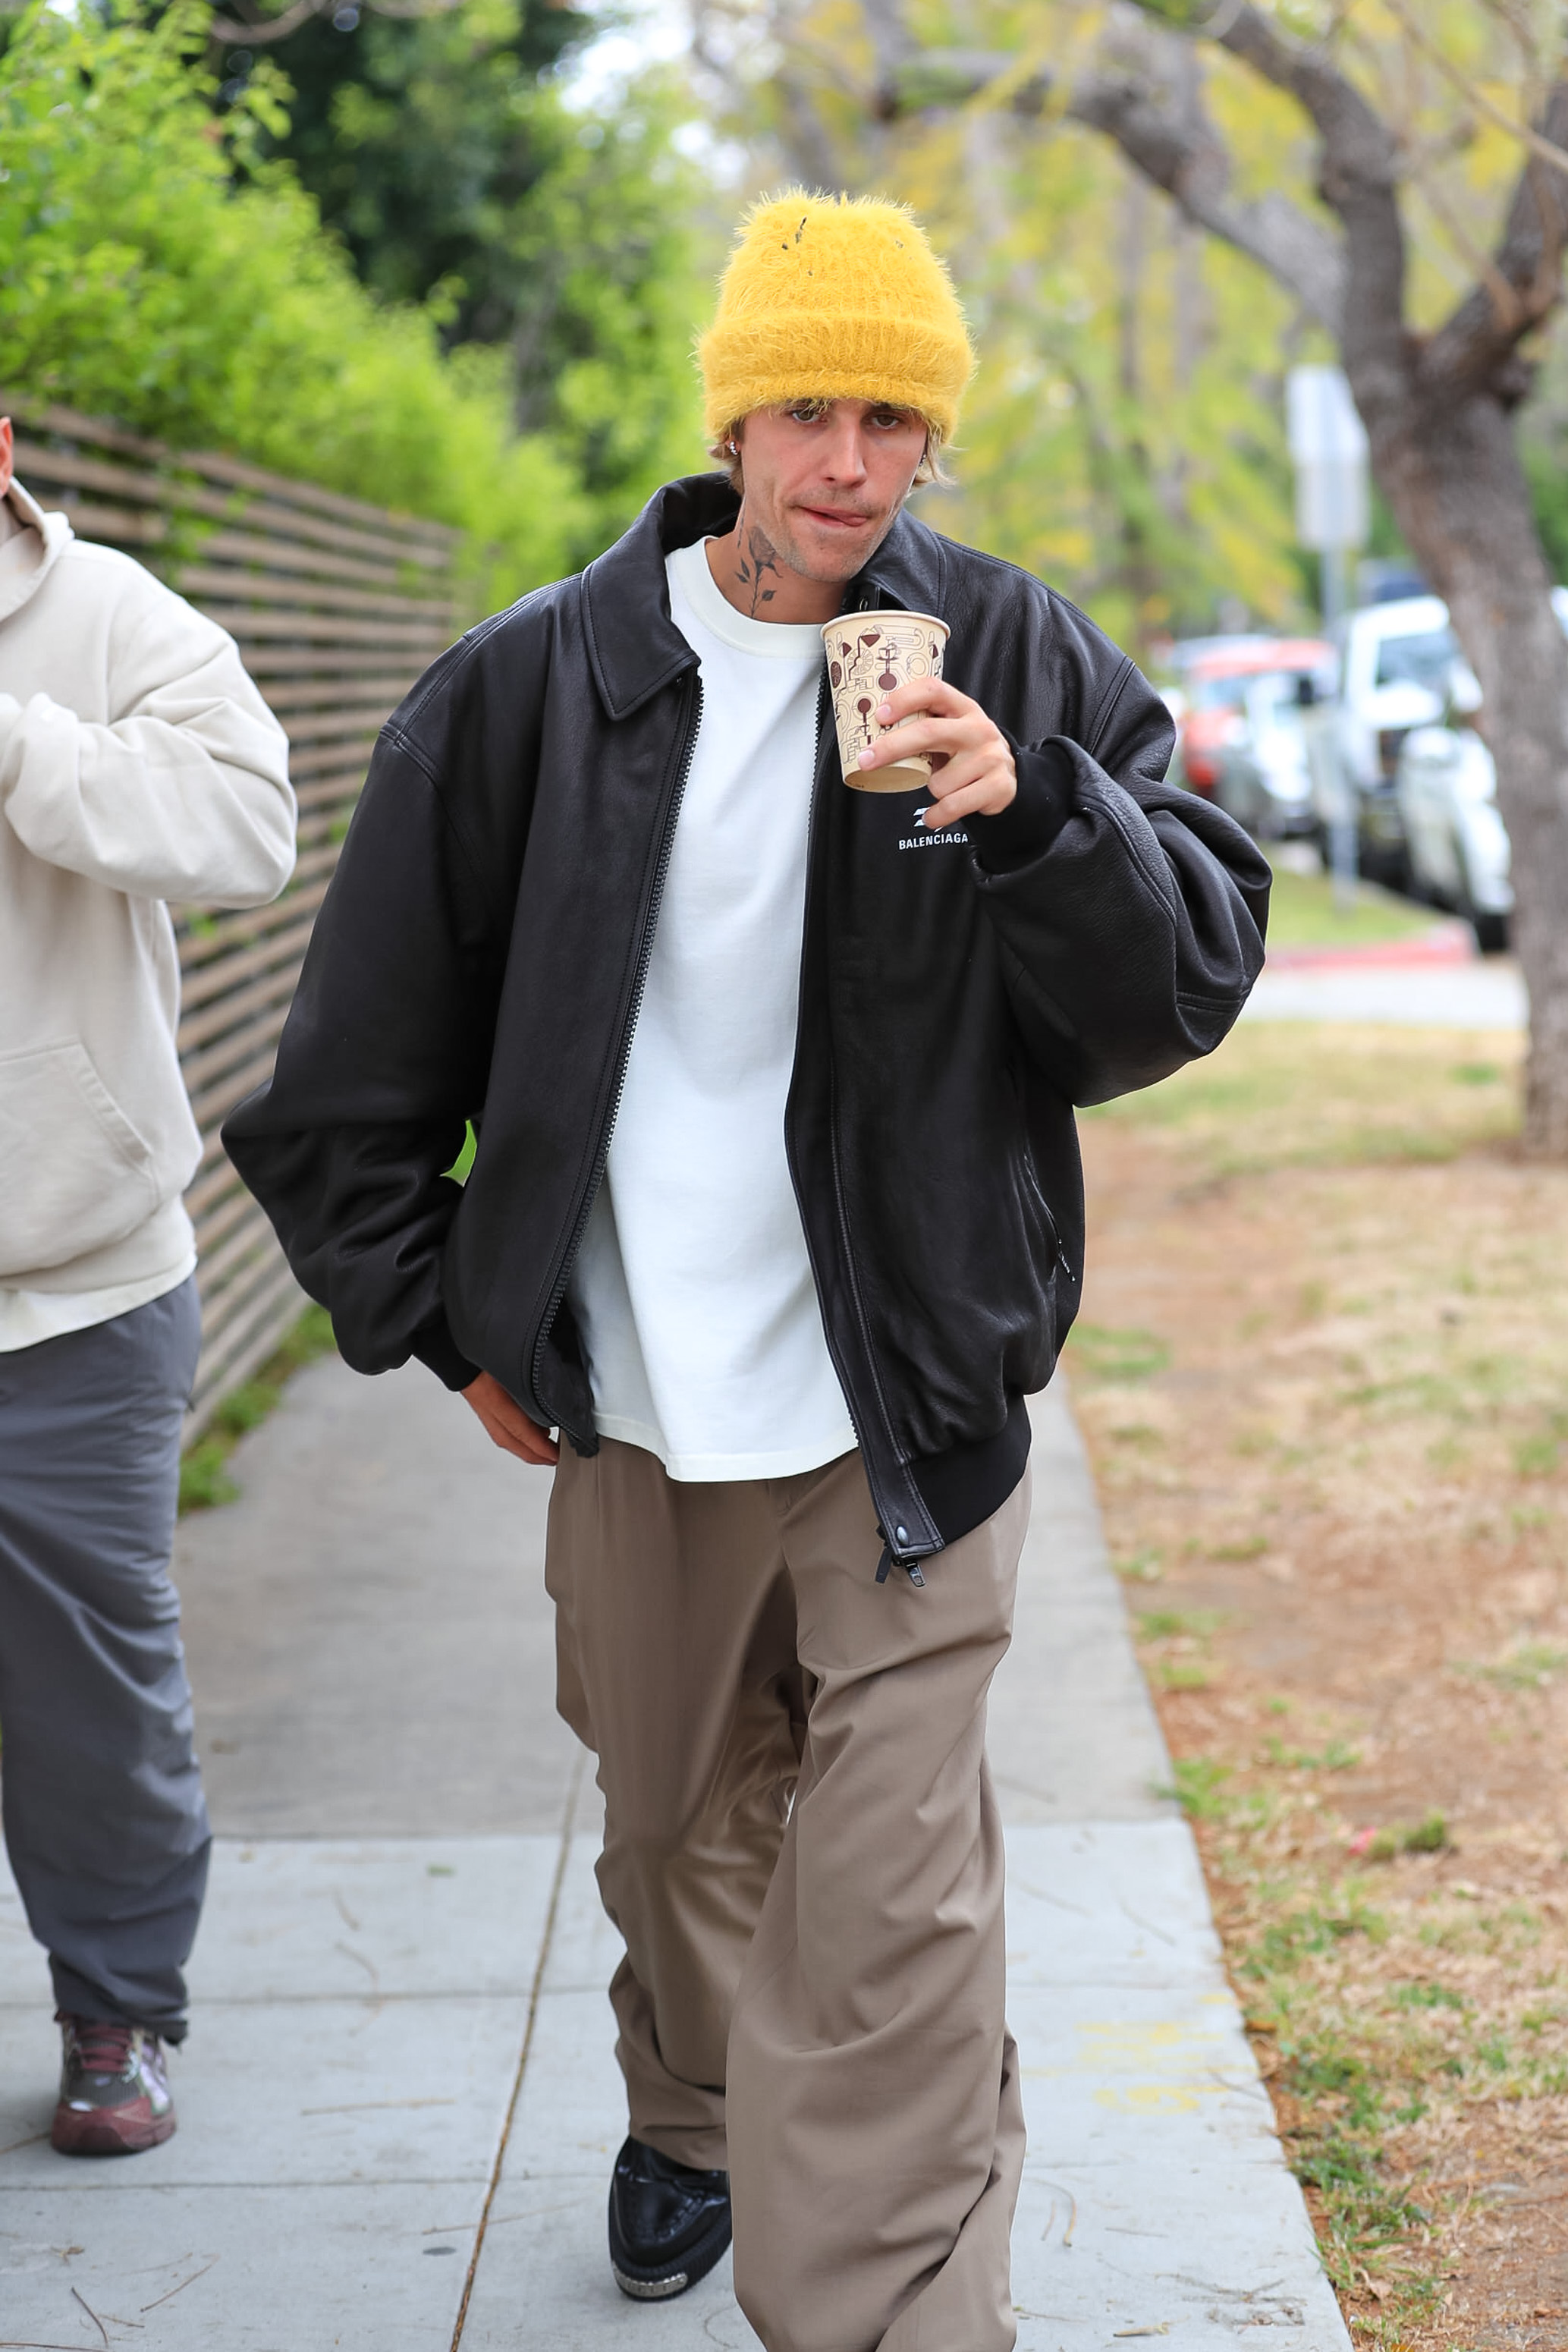 The star stepped out without his wife, Hailey Bieber